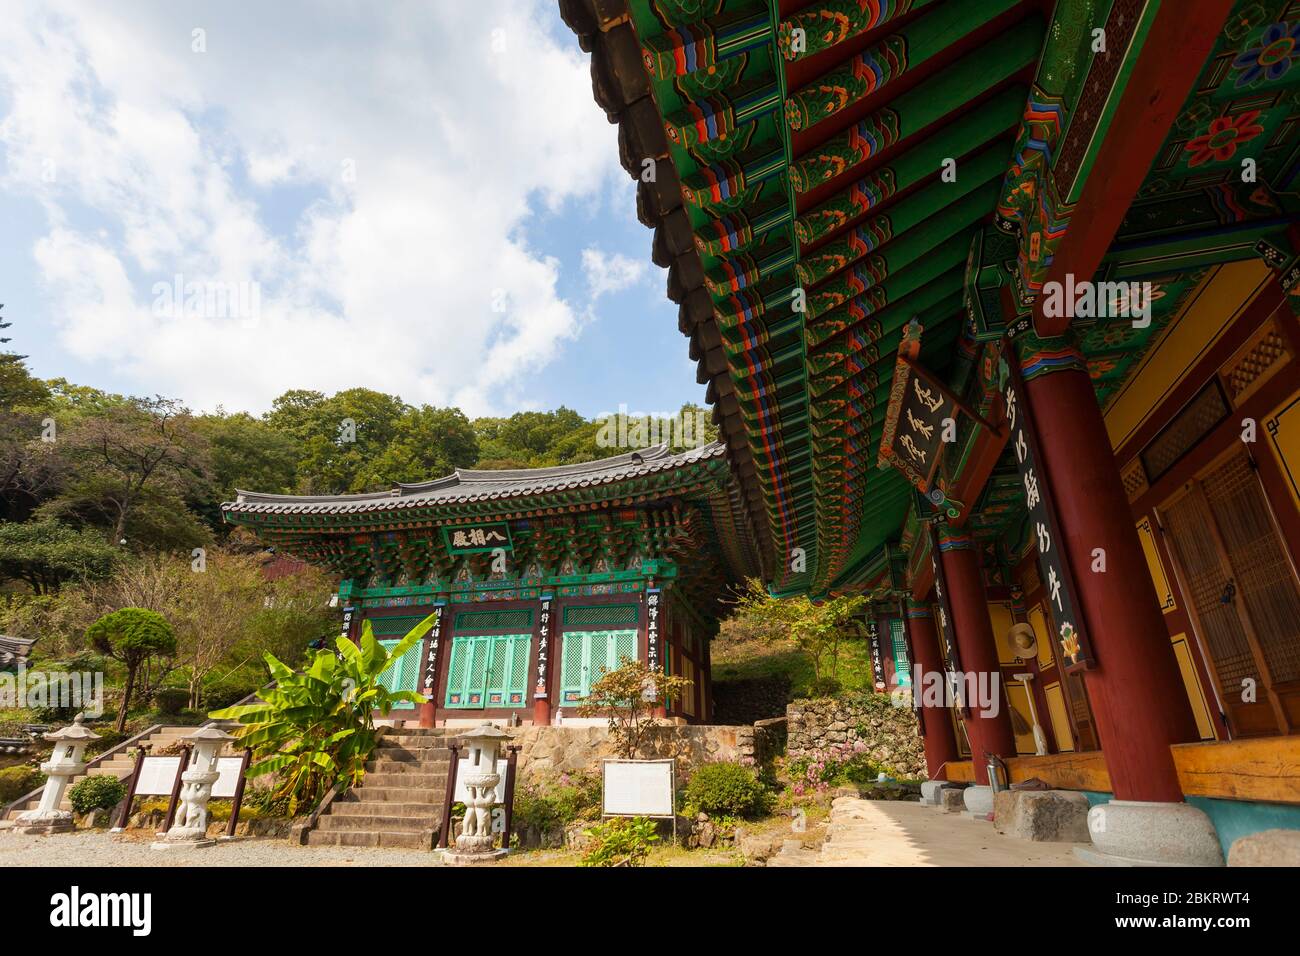 South Korea, South Gyeongsang Province, Ssanggyesa Temple, South Korea, South Gyeongsang Province, Ssanggyesa temple, building, facade and roof made of traditional painted wood Stock Photo